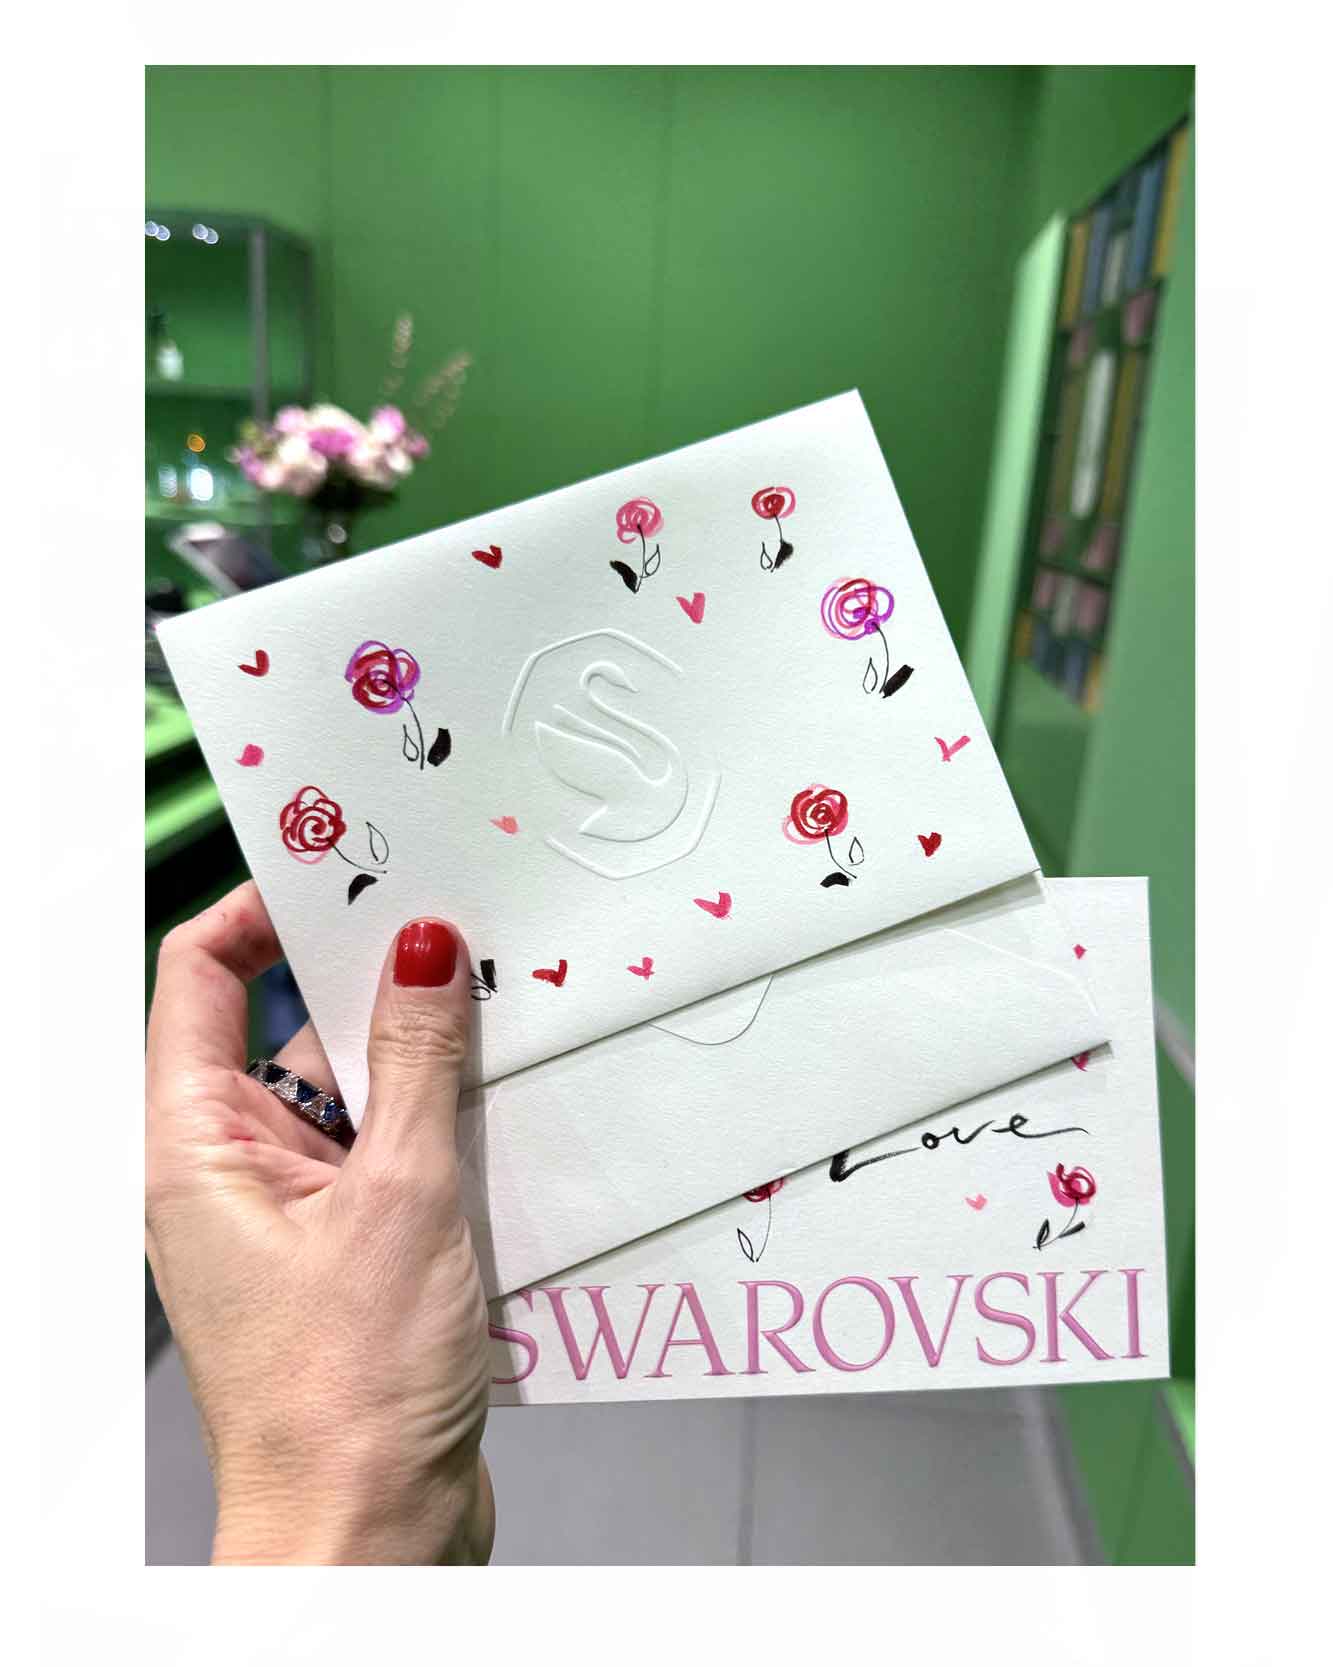 Drawing live for Valentines Day for Swarovski. Offering custimisation for customers. Drawing on packaging and on envelopes. Little roses hand drawn with love hearts along with hand written notes.